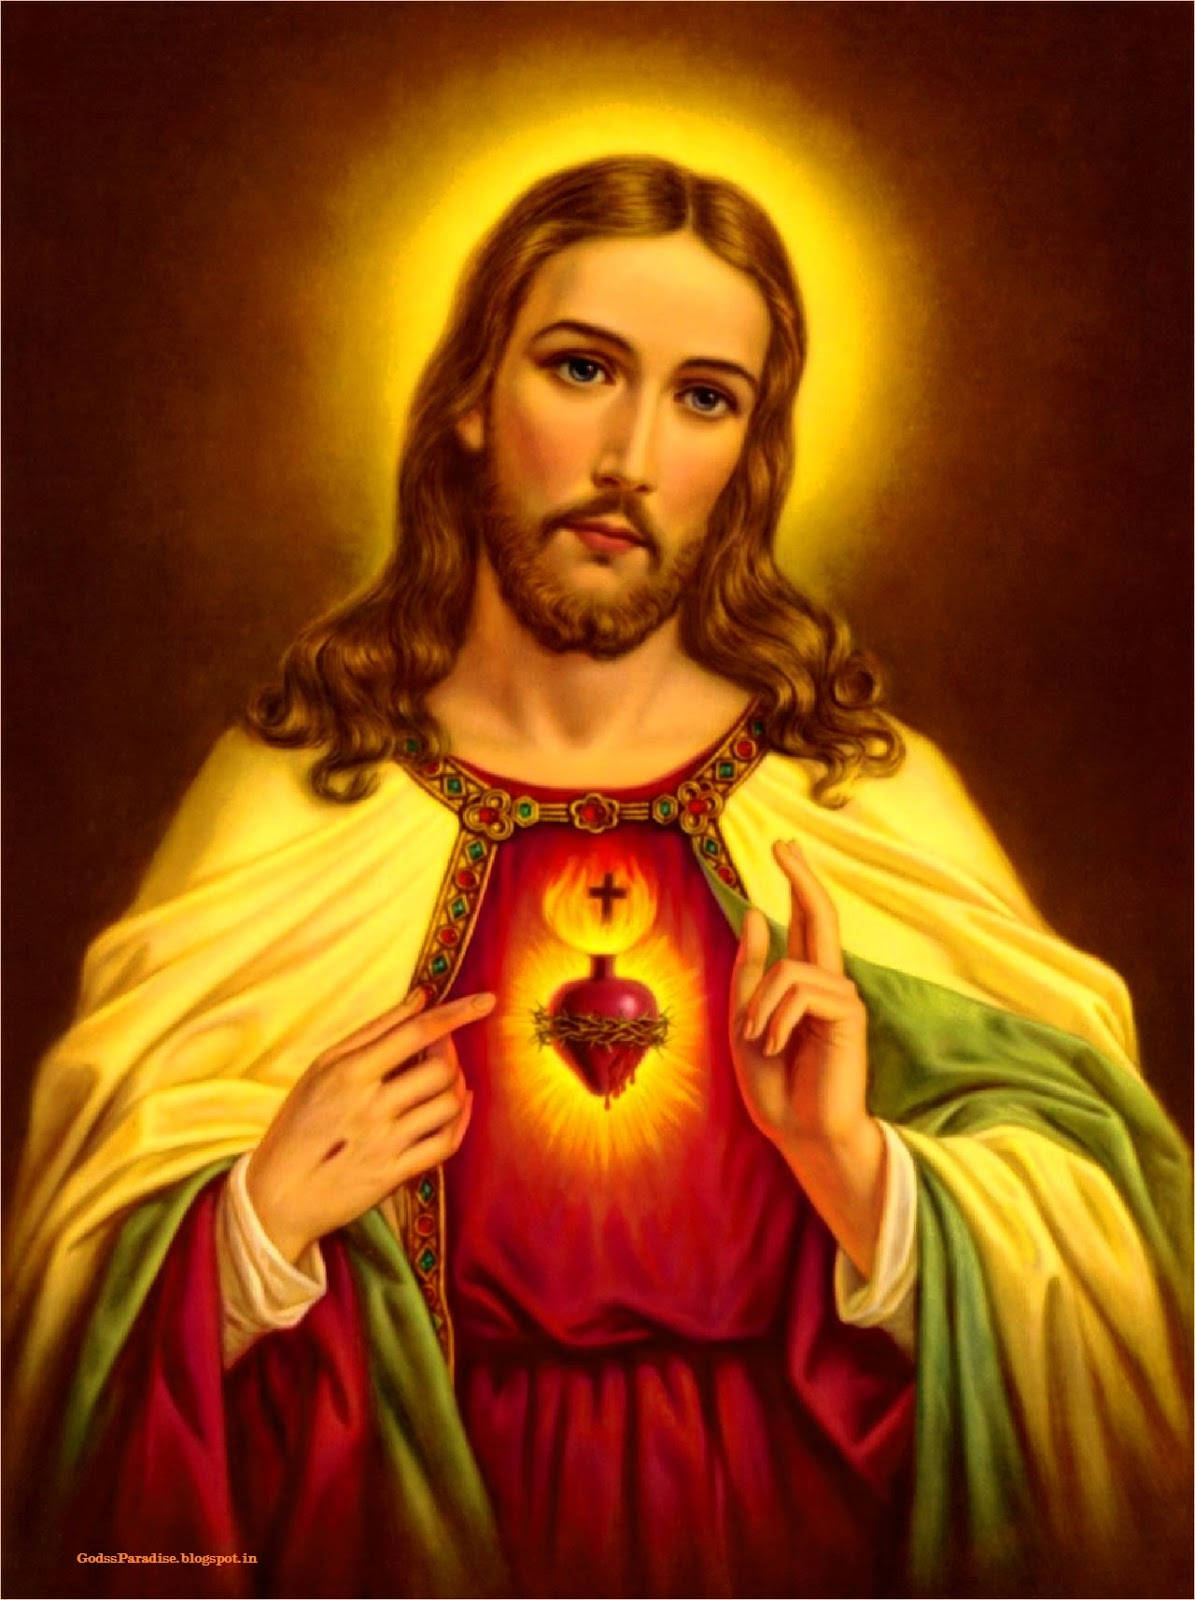 Jesus's Sacref Heart is an eternal reminder of His love and mercy. Wallpaper